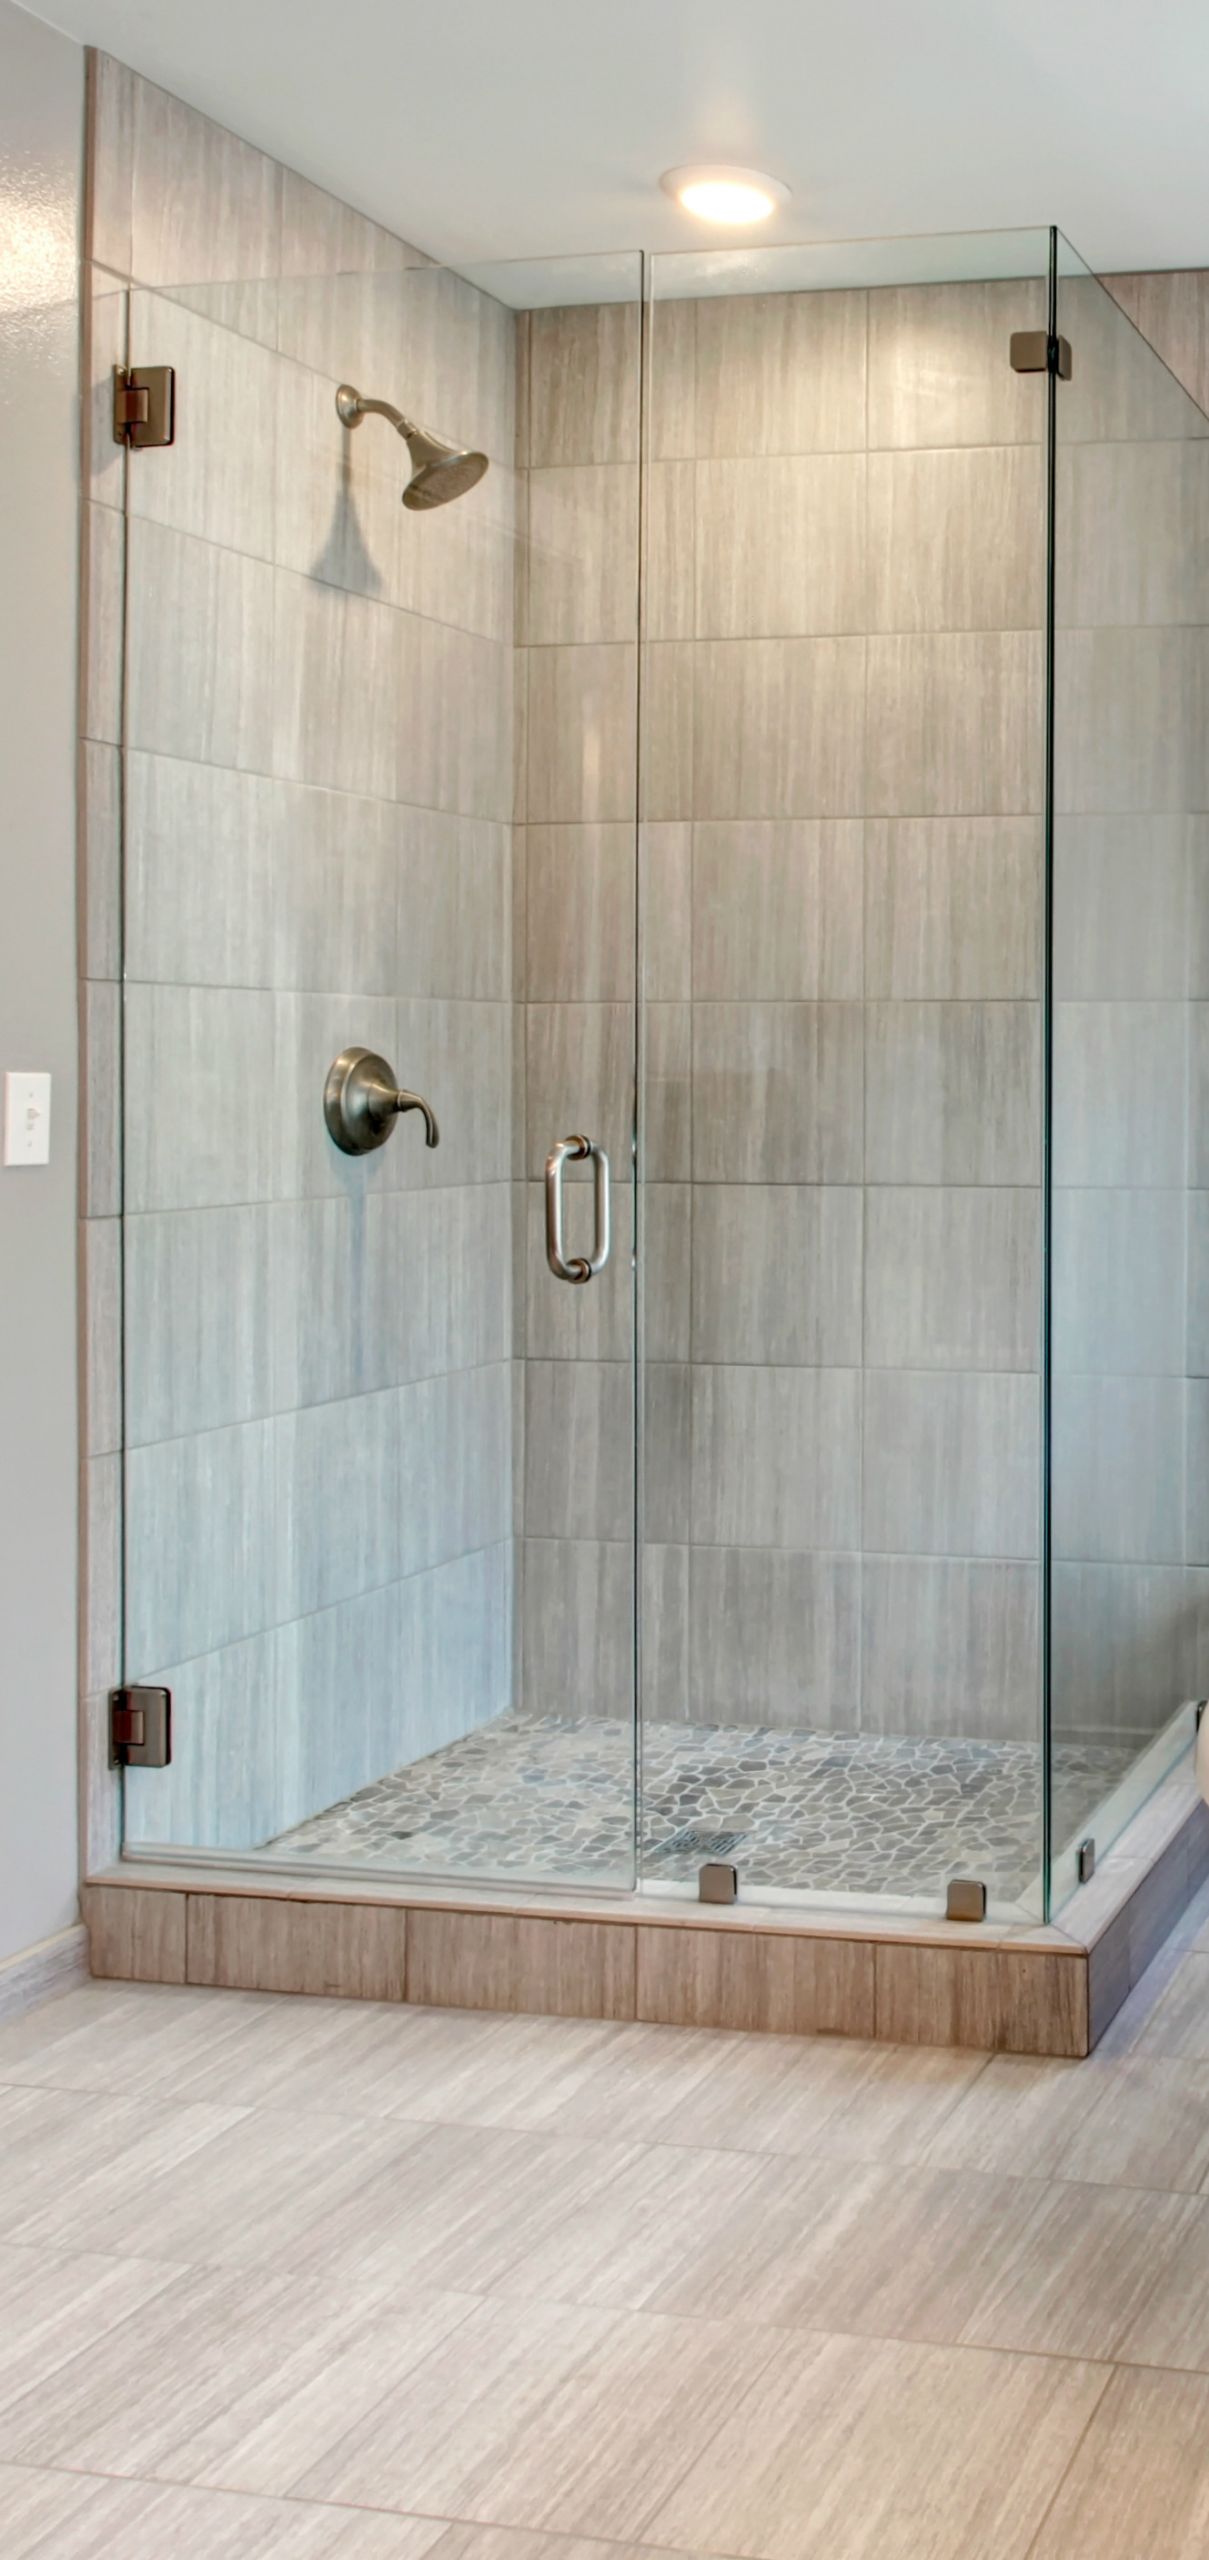 Small Bathroom With Shower Ideas
 Bathroom Interesting Small Shower Stalls With Fabulous